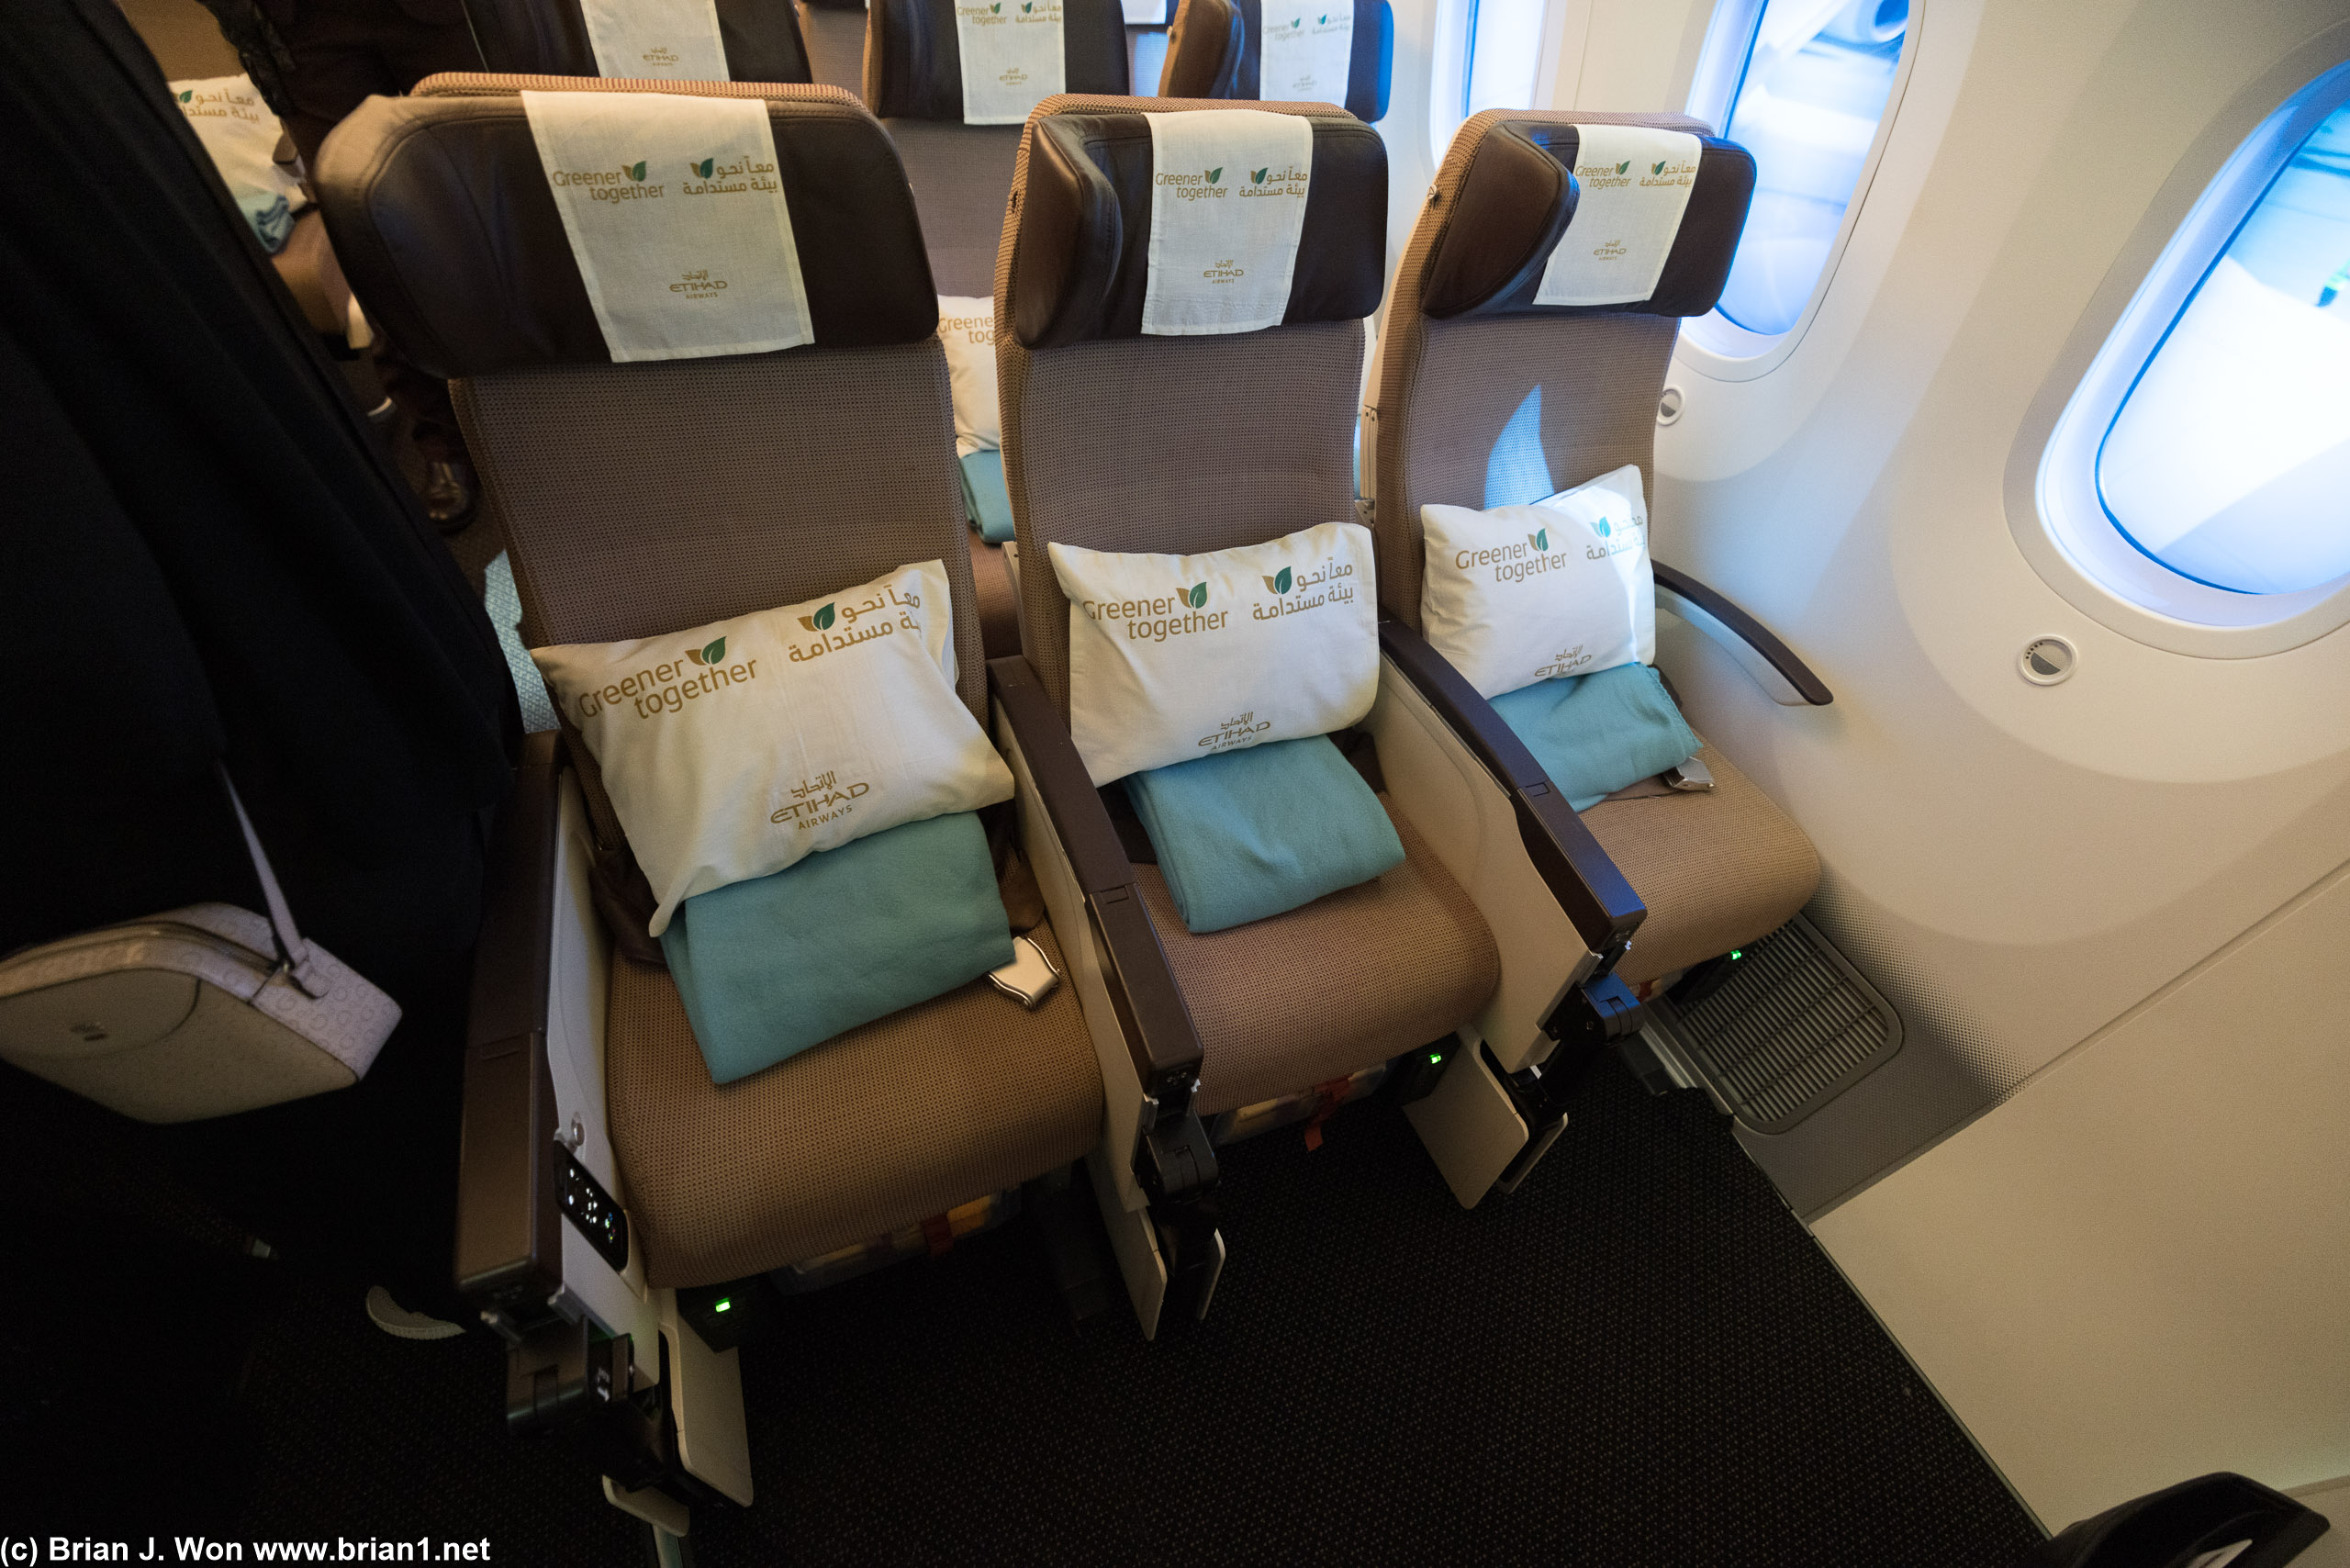 Economy class doesn't look bad for a 787.